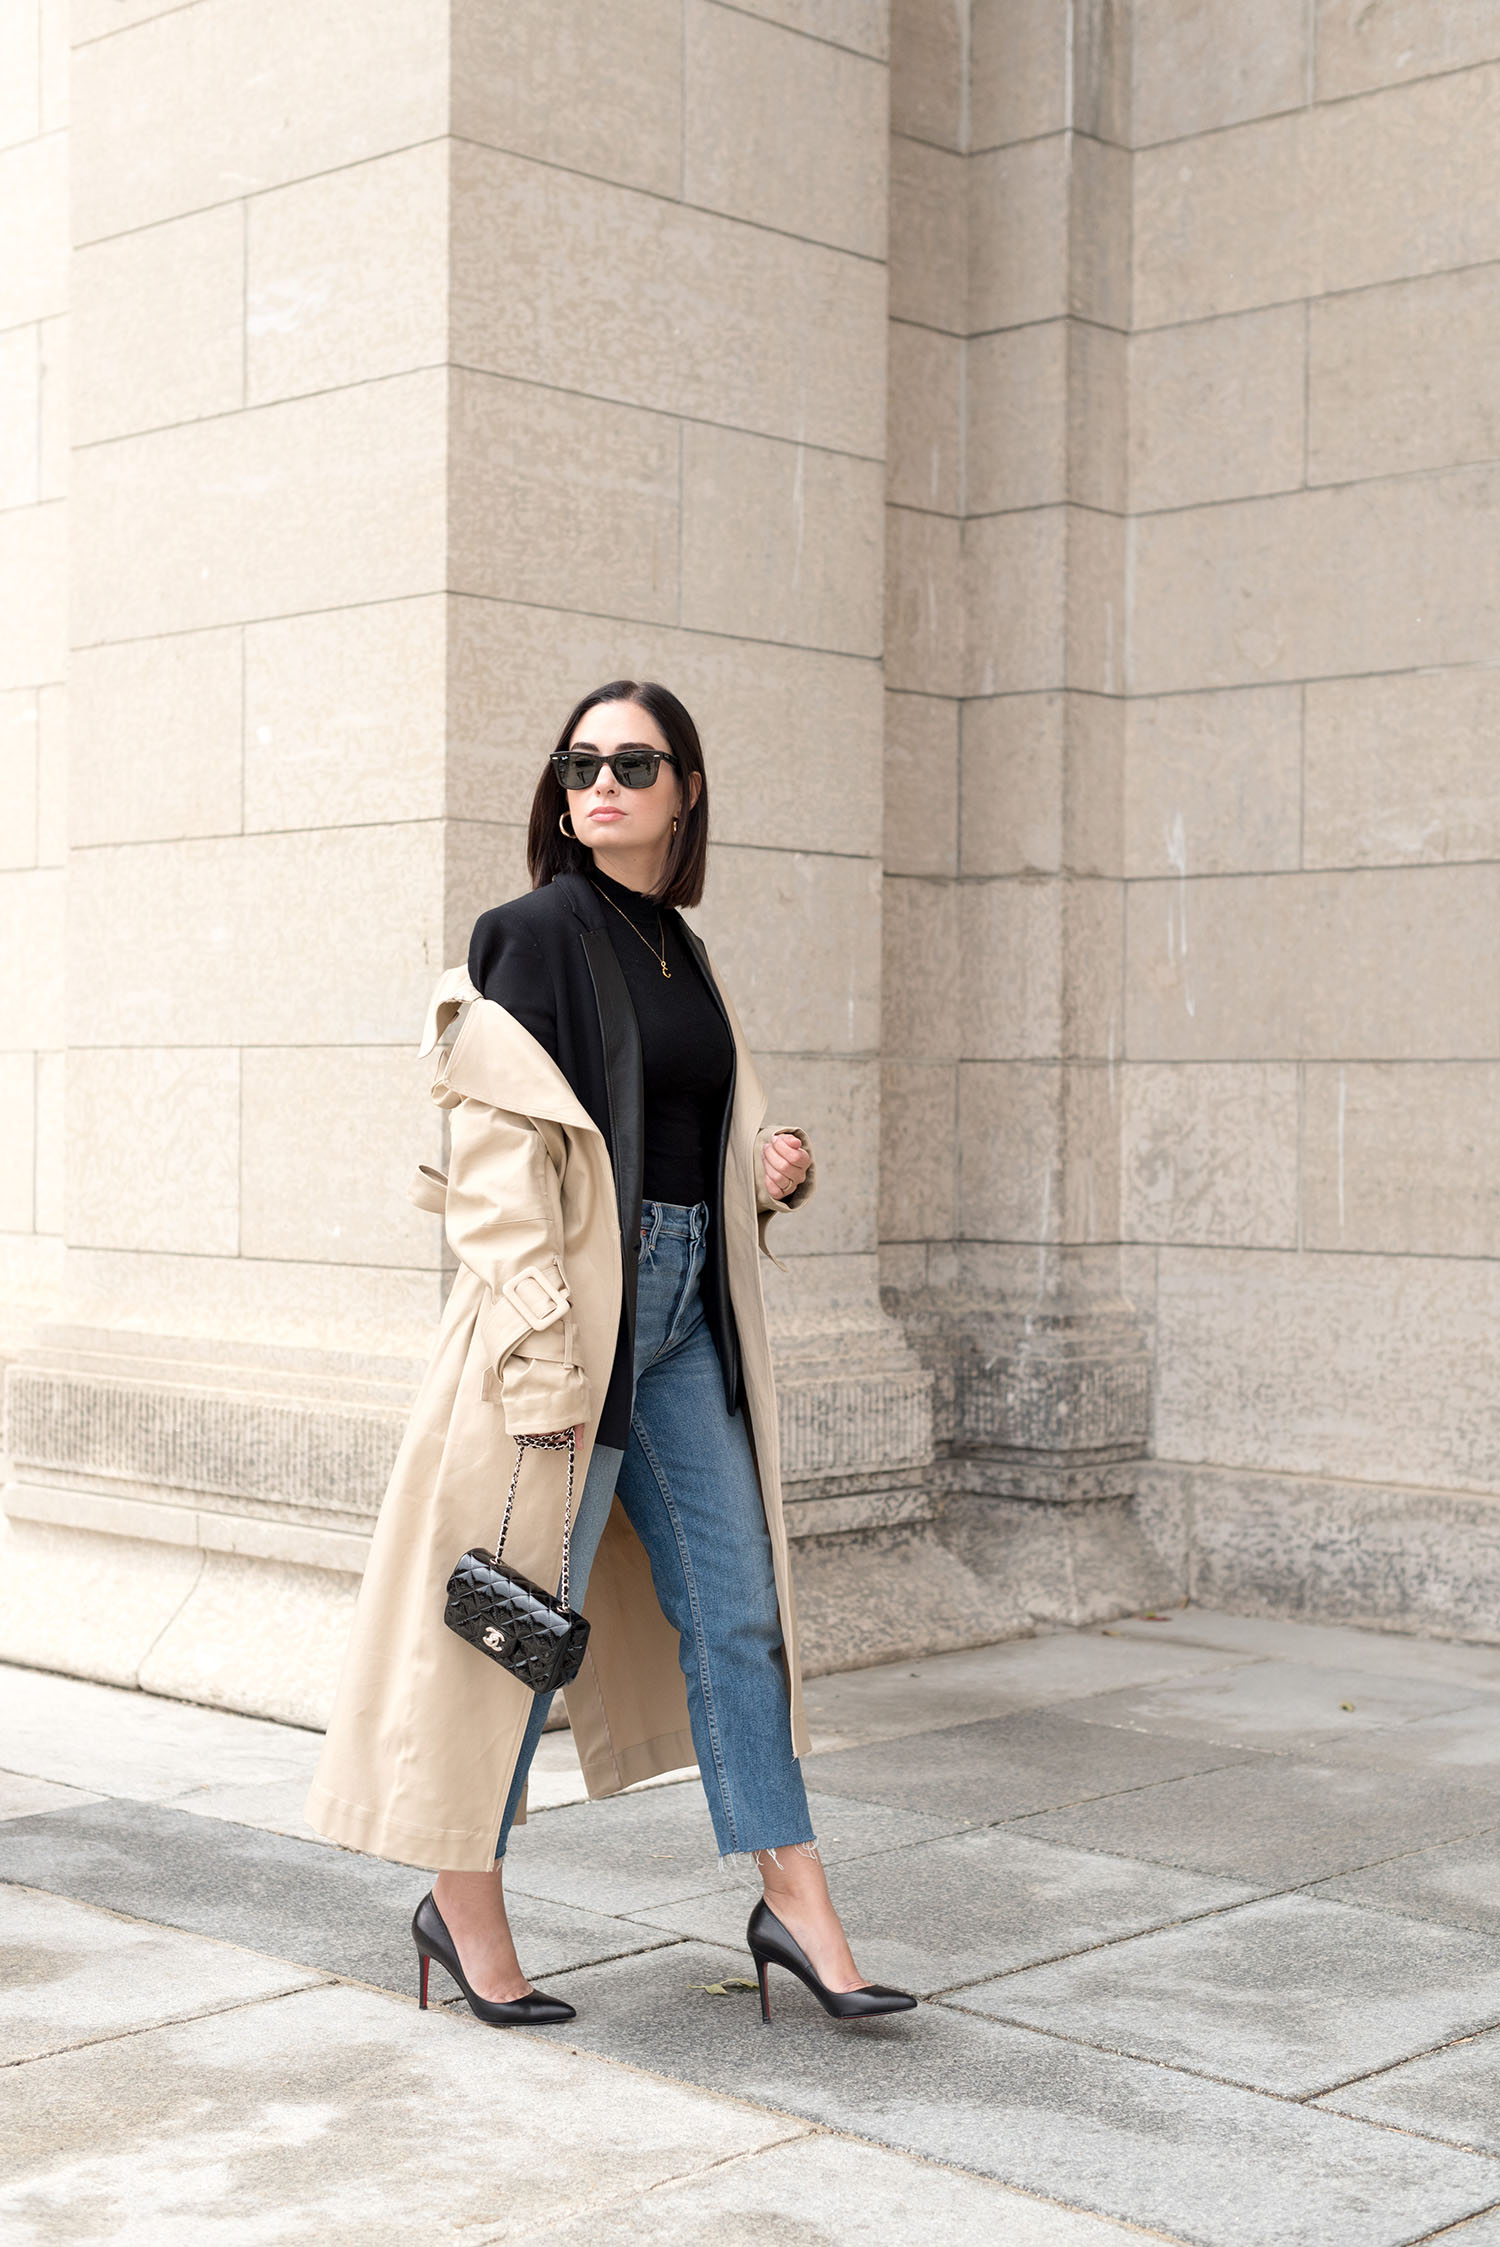 Top Canadian fashion blogger Cee Fardoe of Coco & Vera wears a Helmut Lang blazer and carries a Chanel black patent handbag